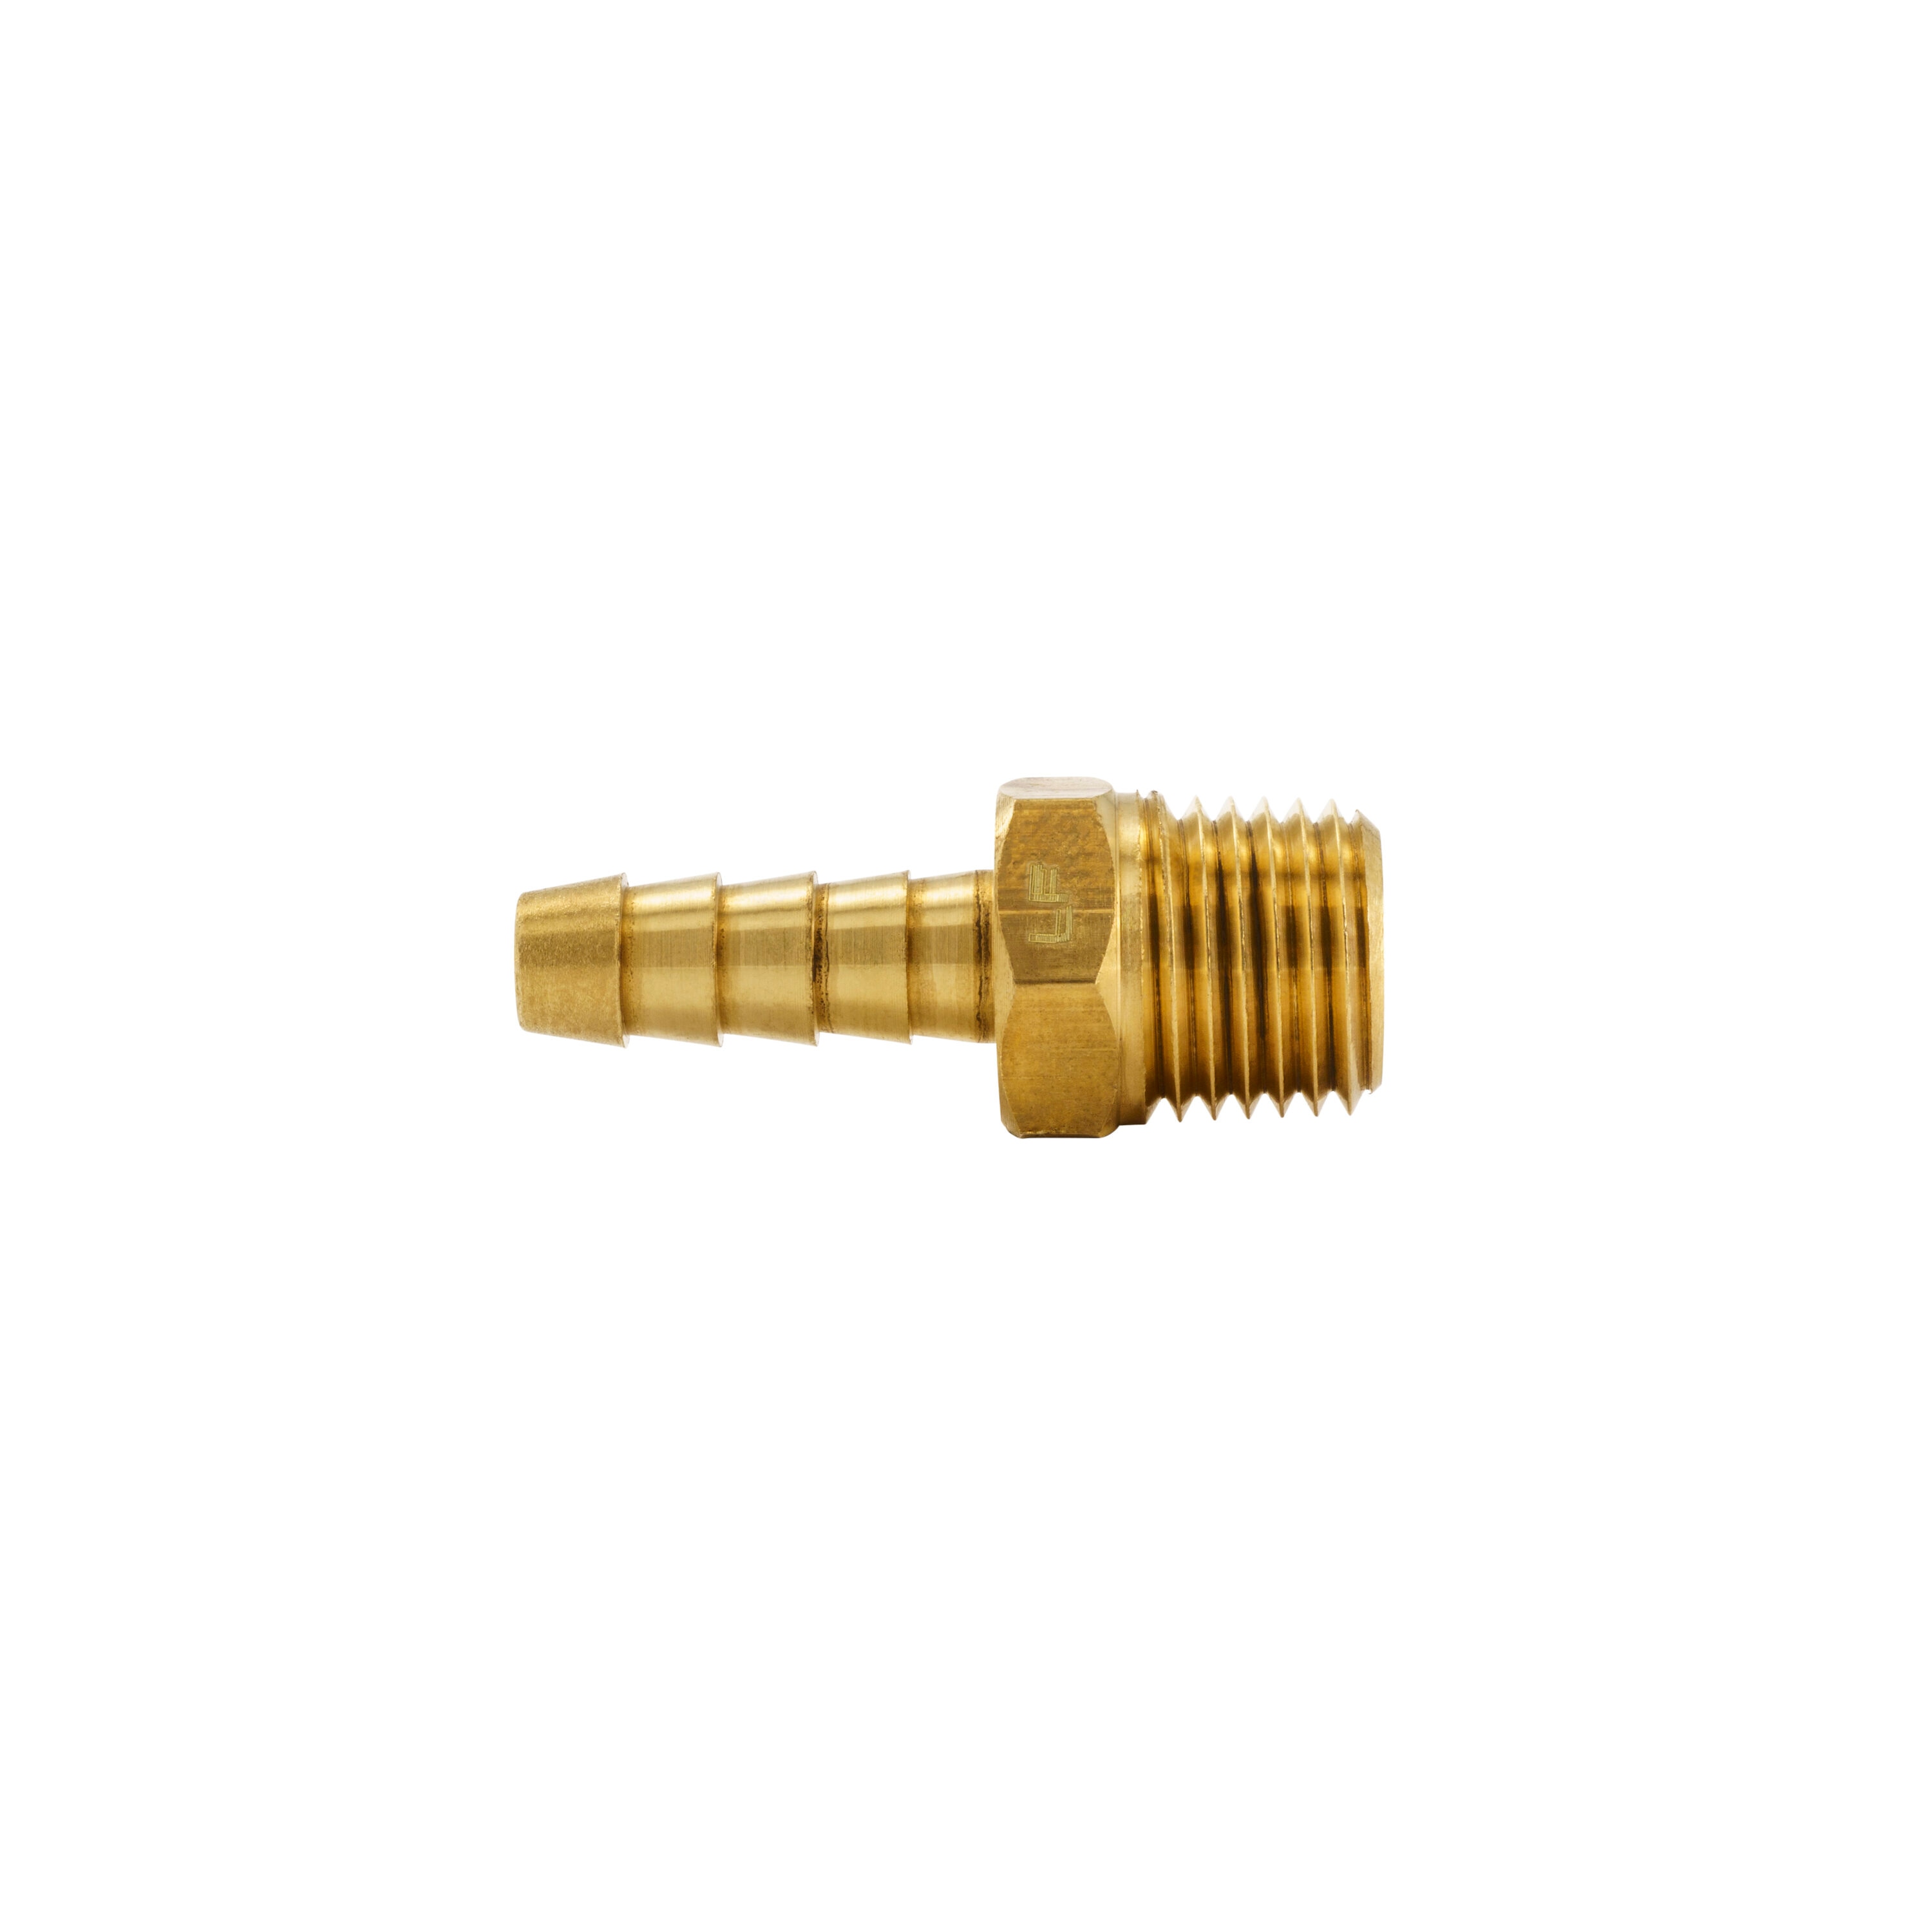 1 Inch Brass Hose Barb Fitting at Rs 700/kg